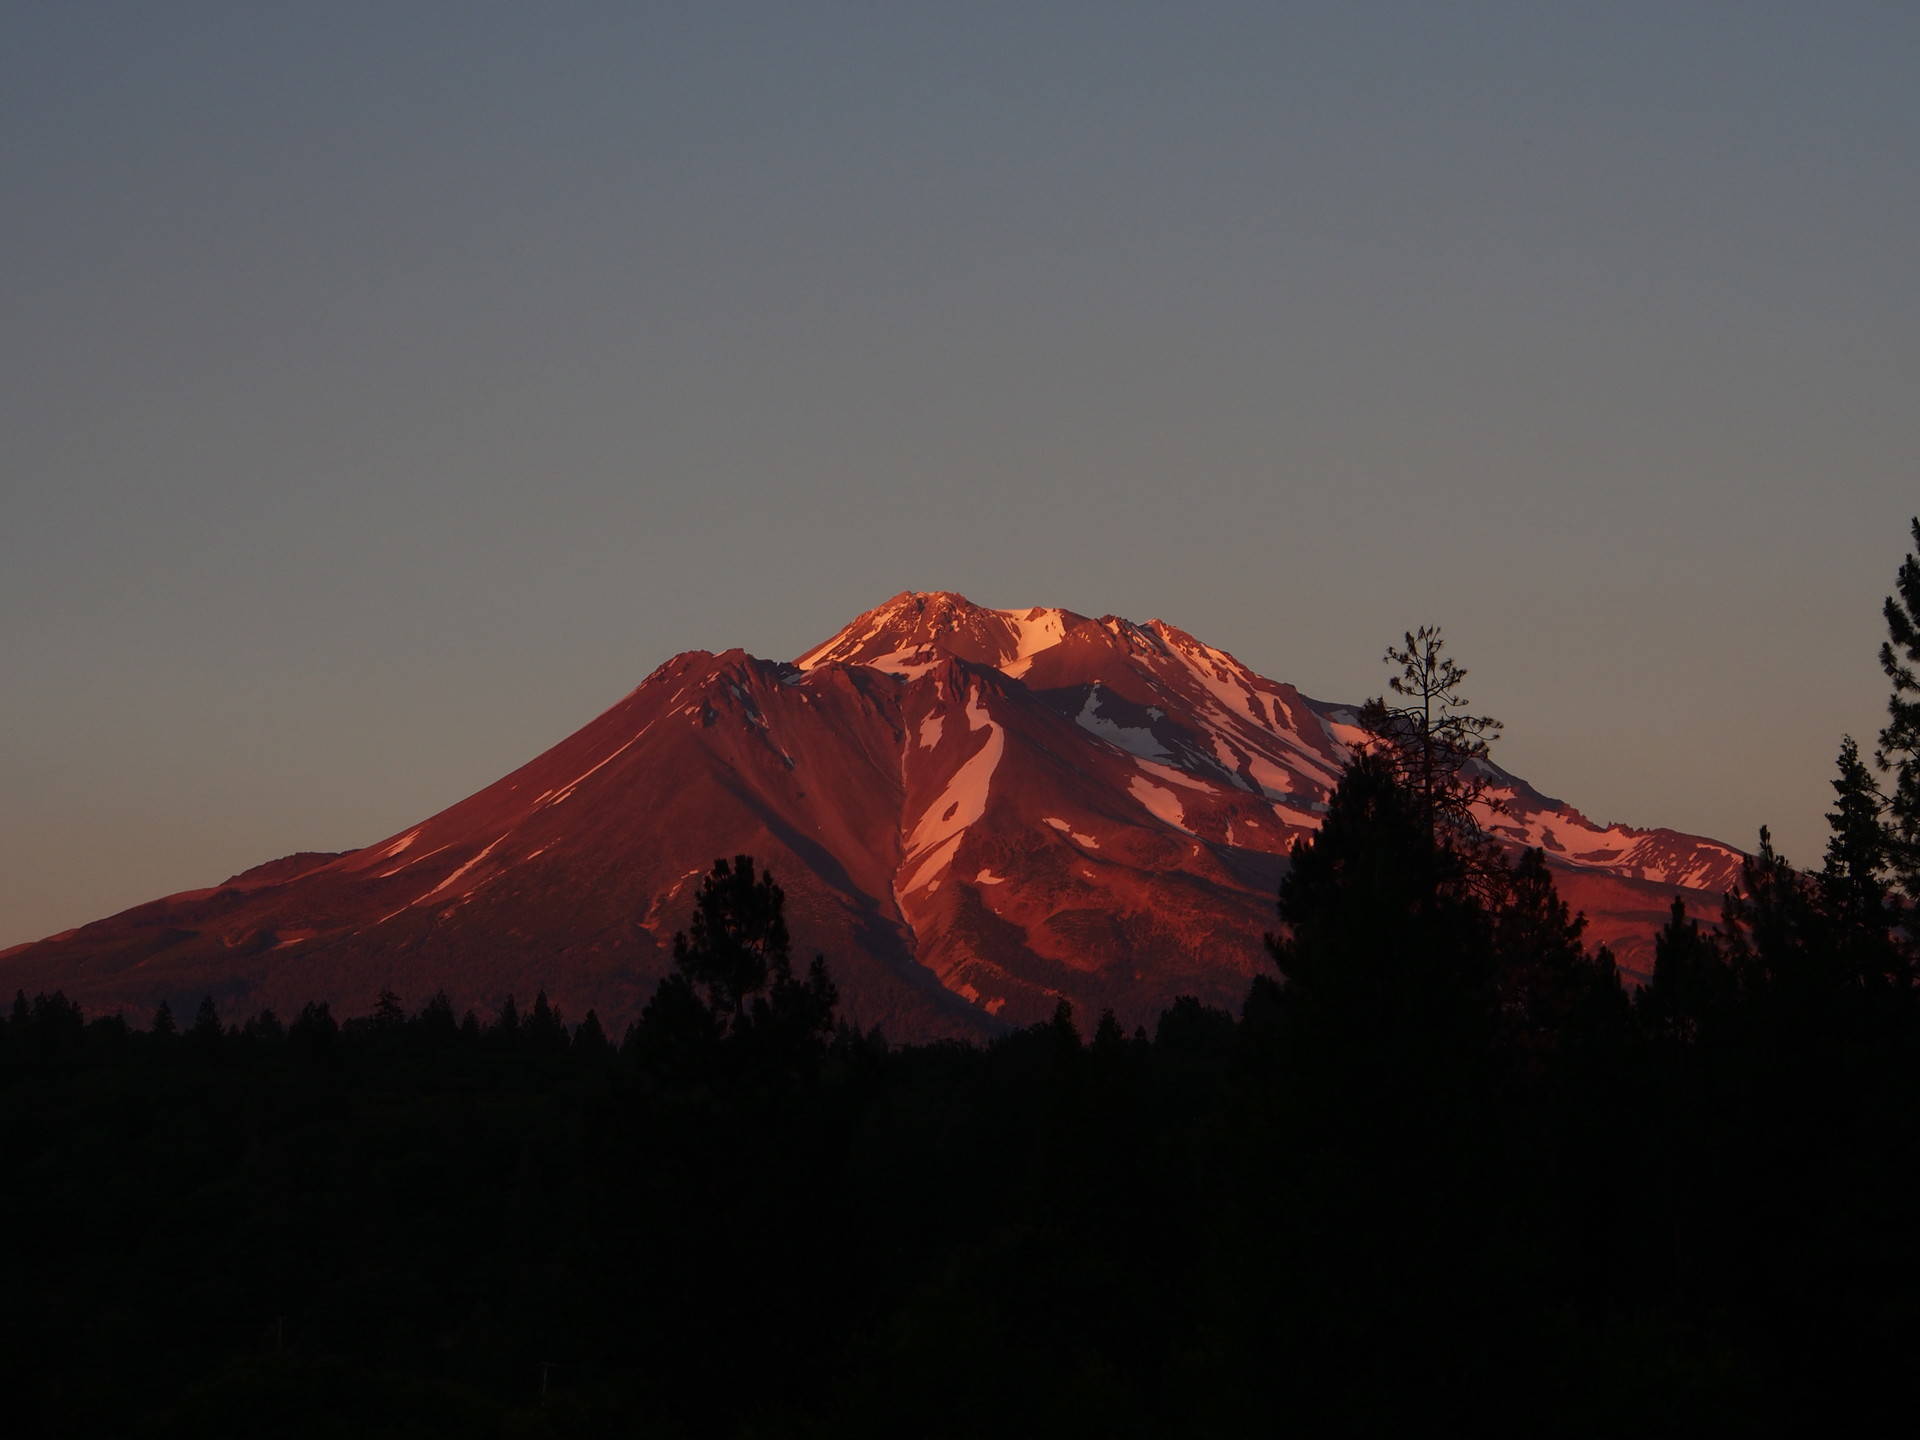 Mt. Shasta is California’s highest volcano, and it towers above the surrounding landscape. Cat Schuknecht/KQED